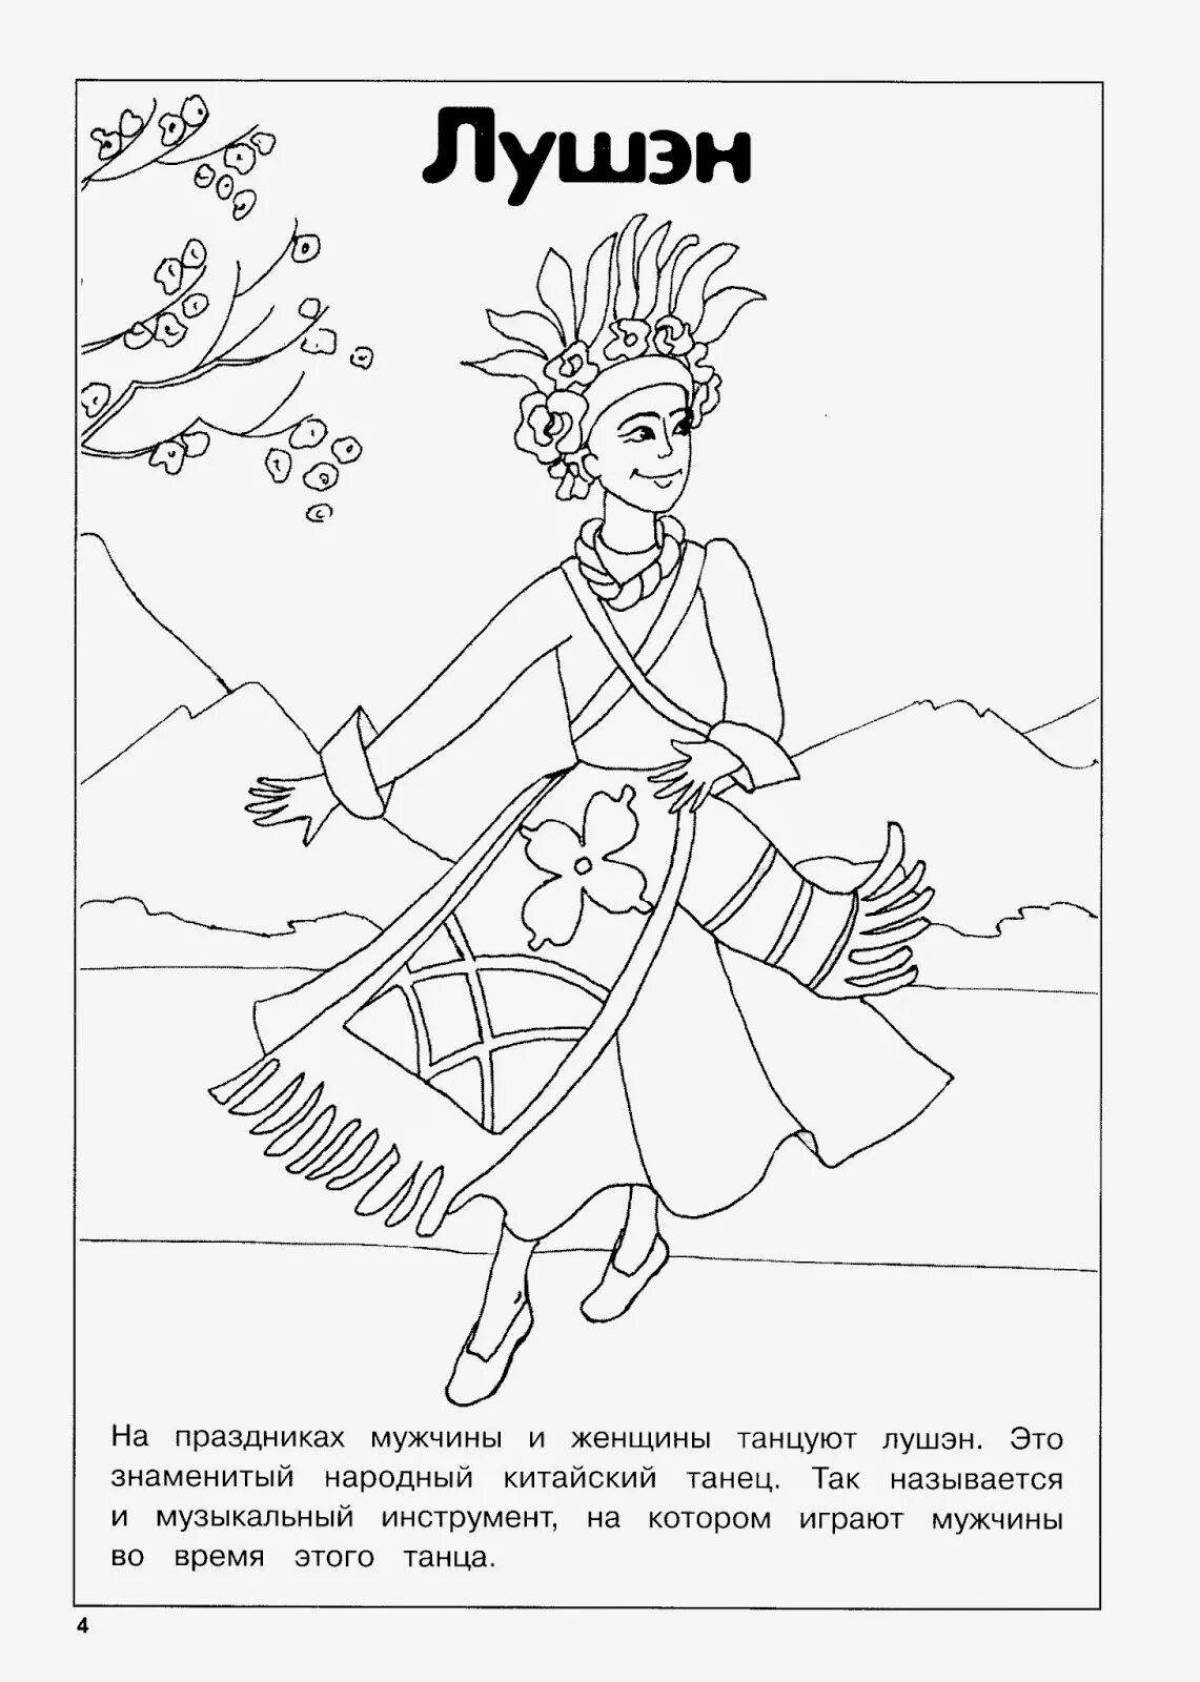 An animated polka dance coloring page